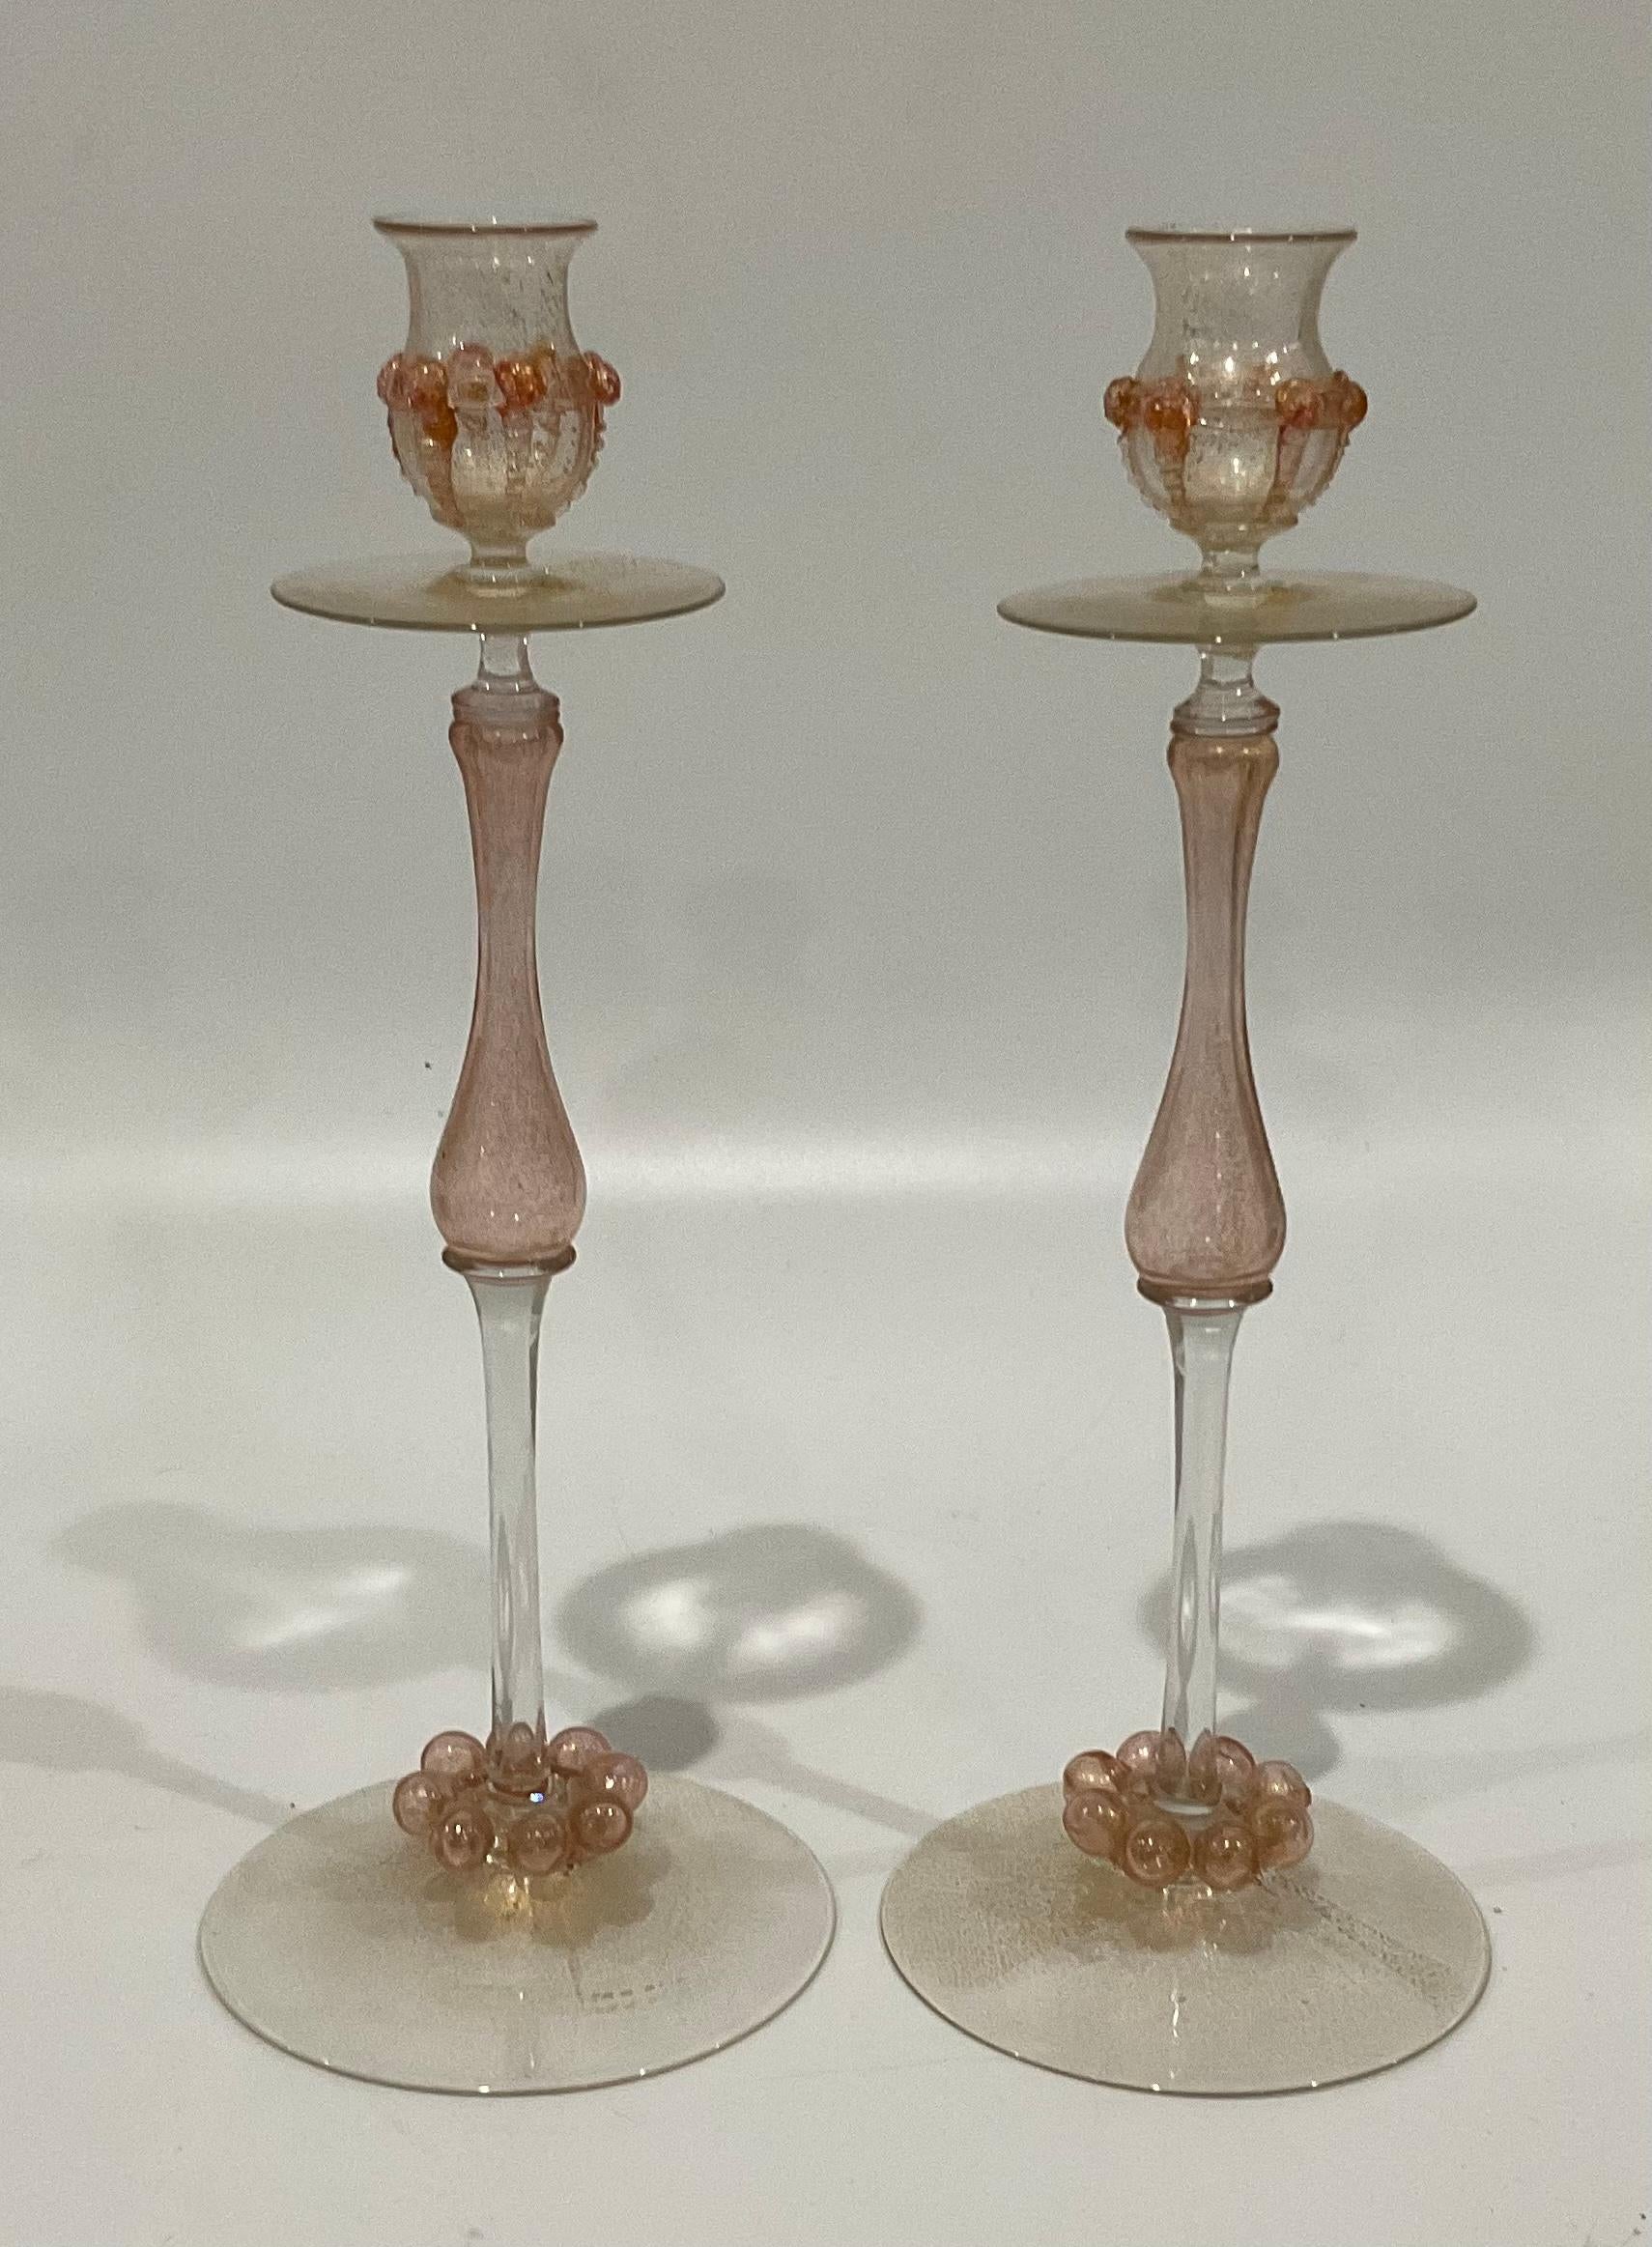 Art Deco Early Venetian Murano Console Set Center Piece Pair Candle Holders For Sale